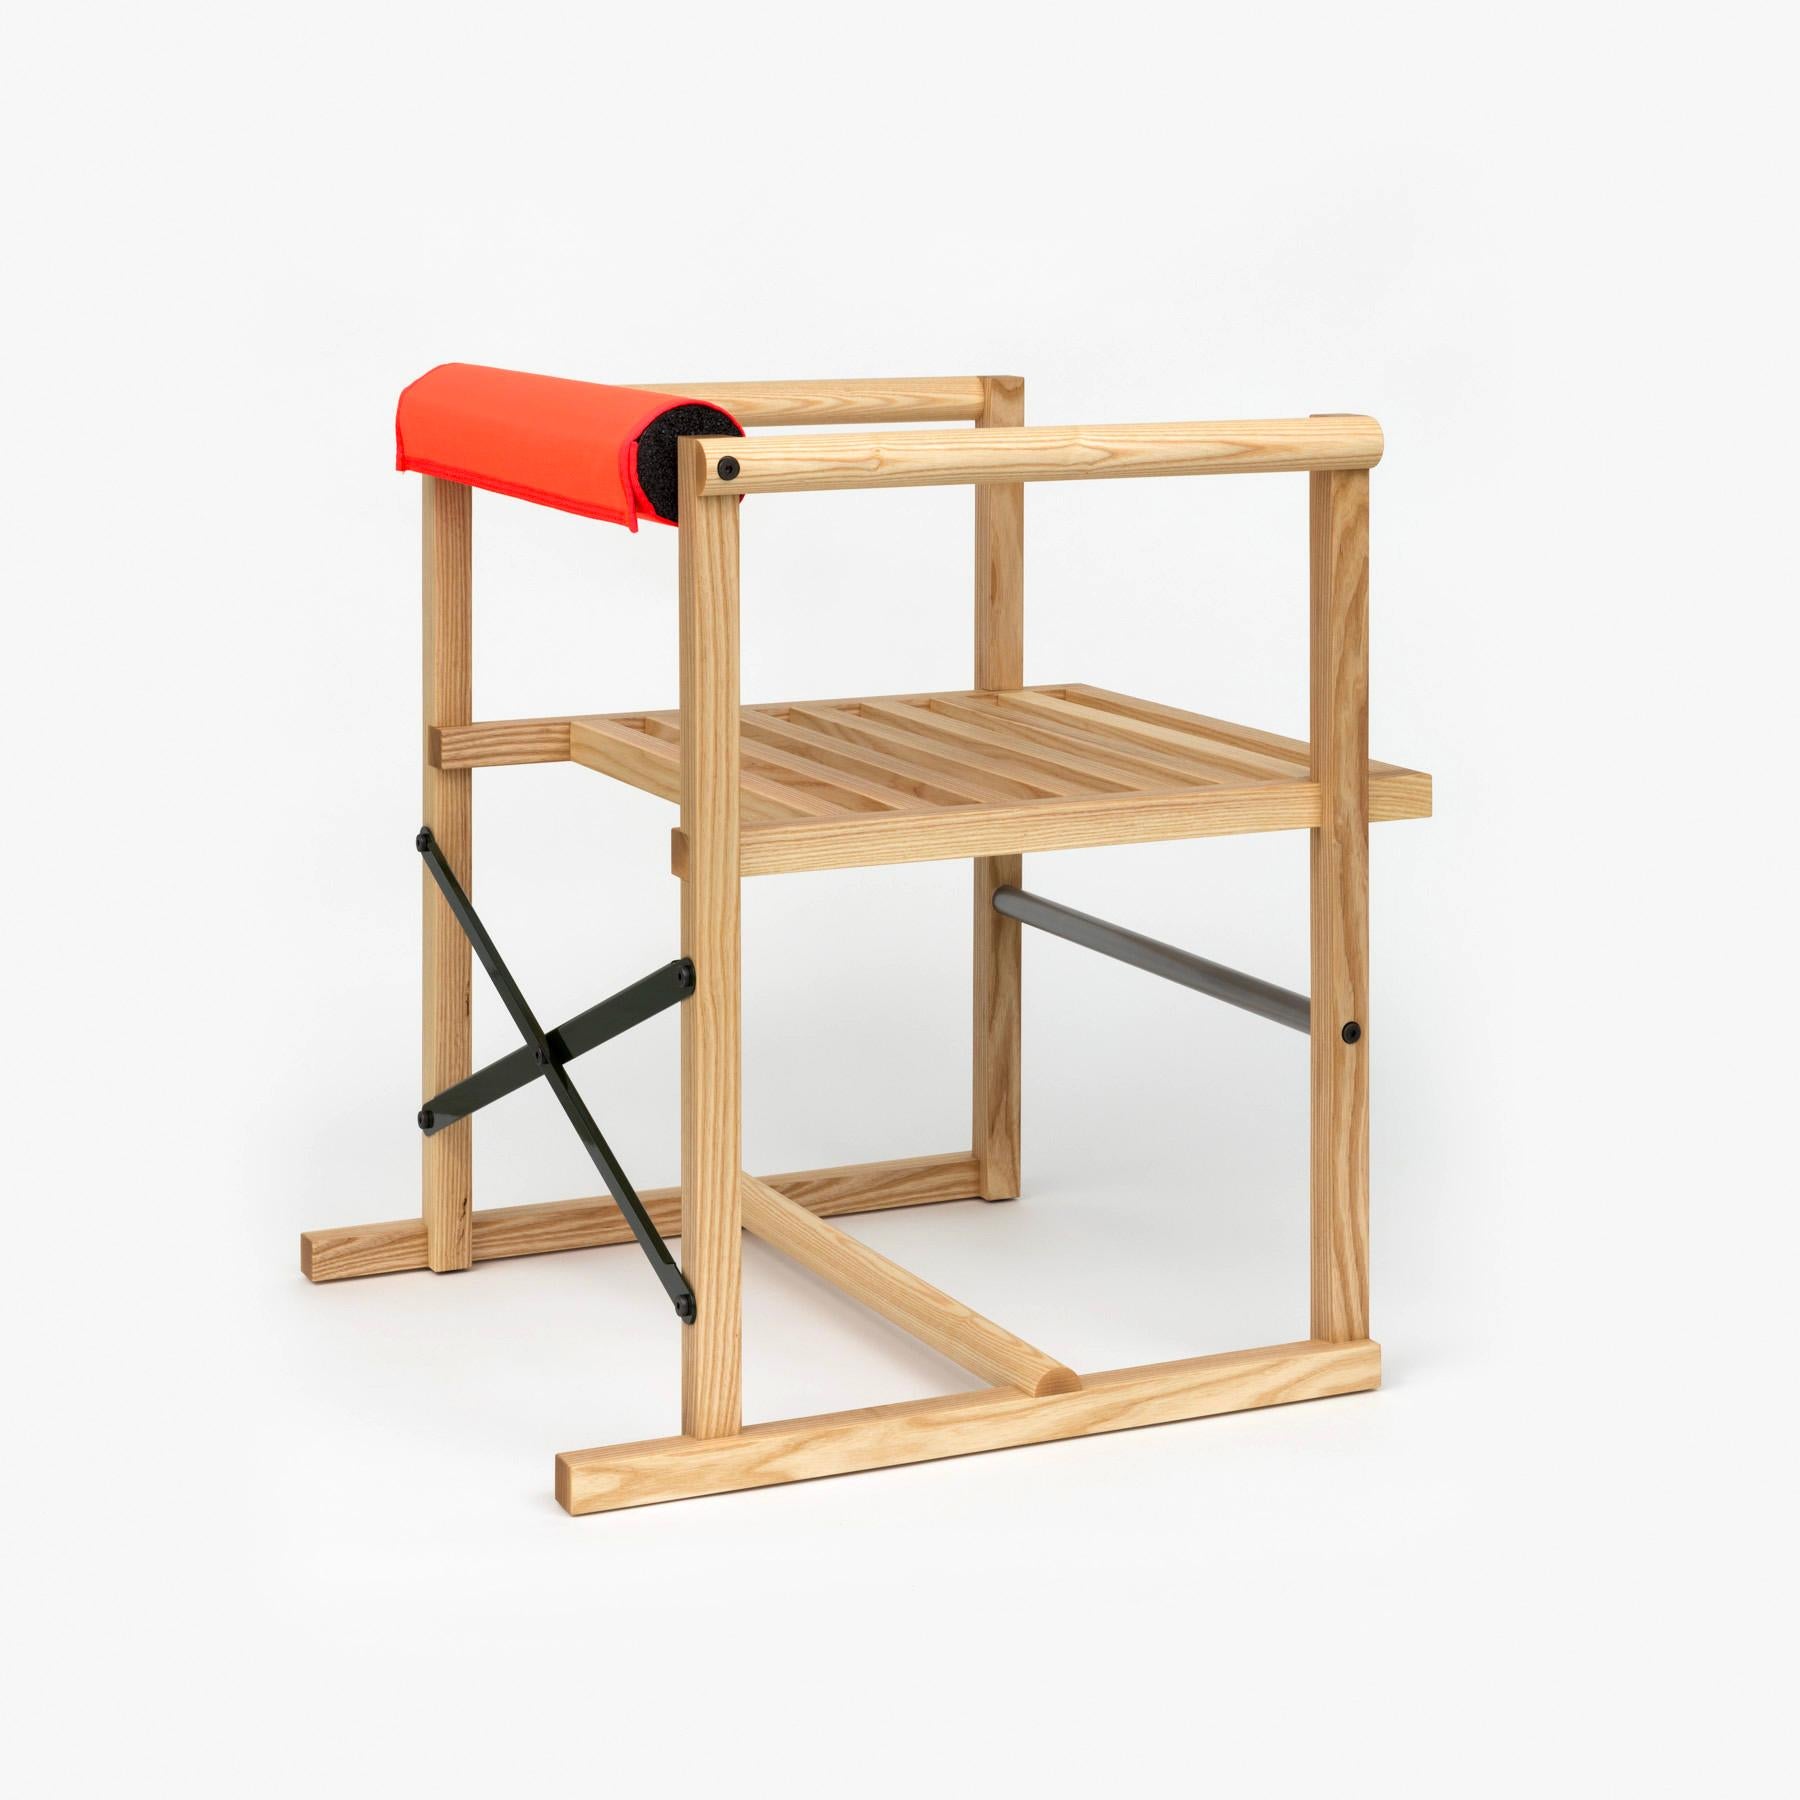 A De Stijl inspired lounge chair emphasizing the parts that comprise the whole, as well as their connections. The Camp Chair utilizes simple stick-frame construction paired with industrial elements to produce an object that transcends the common